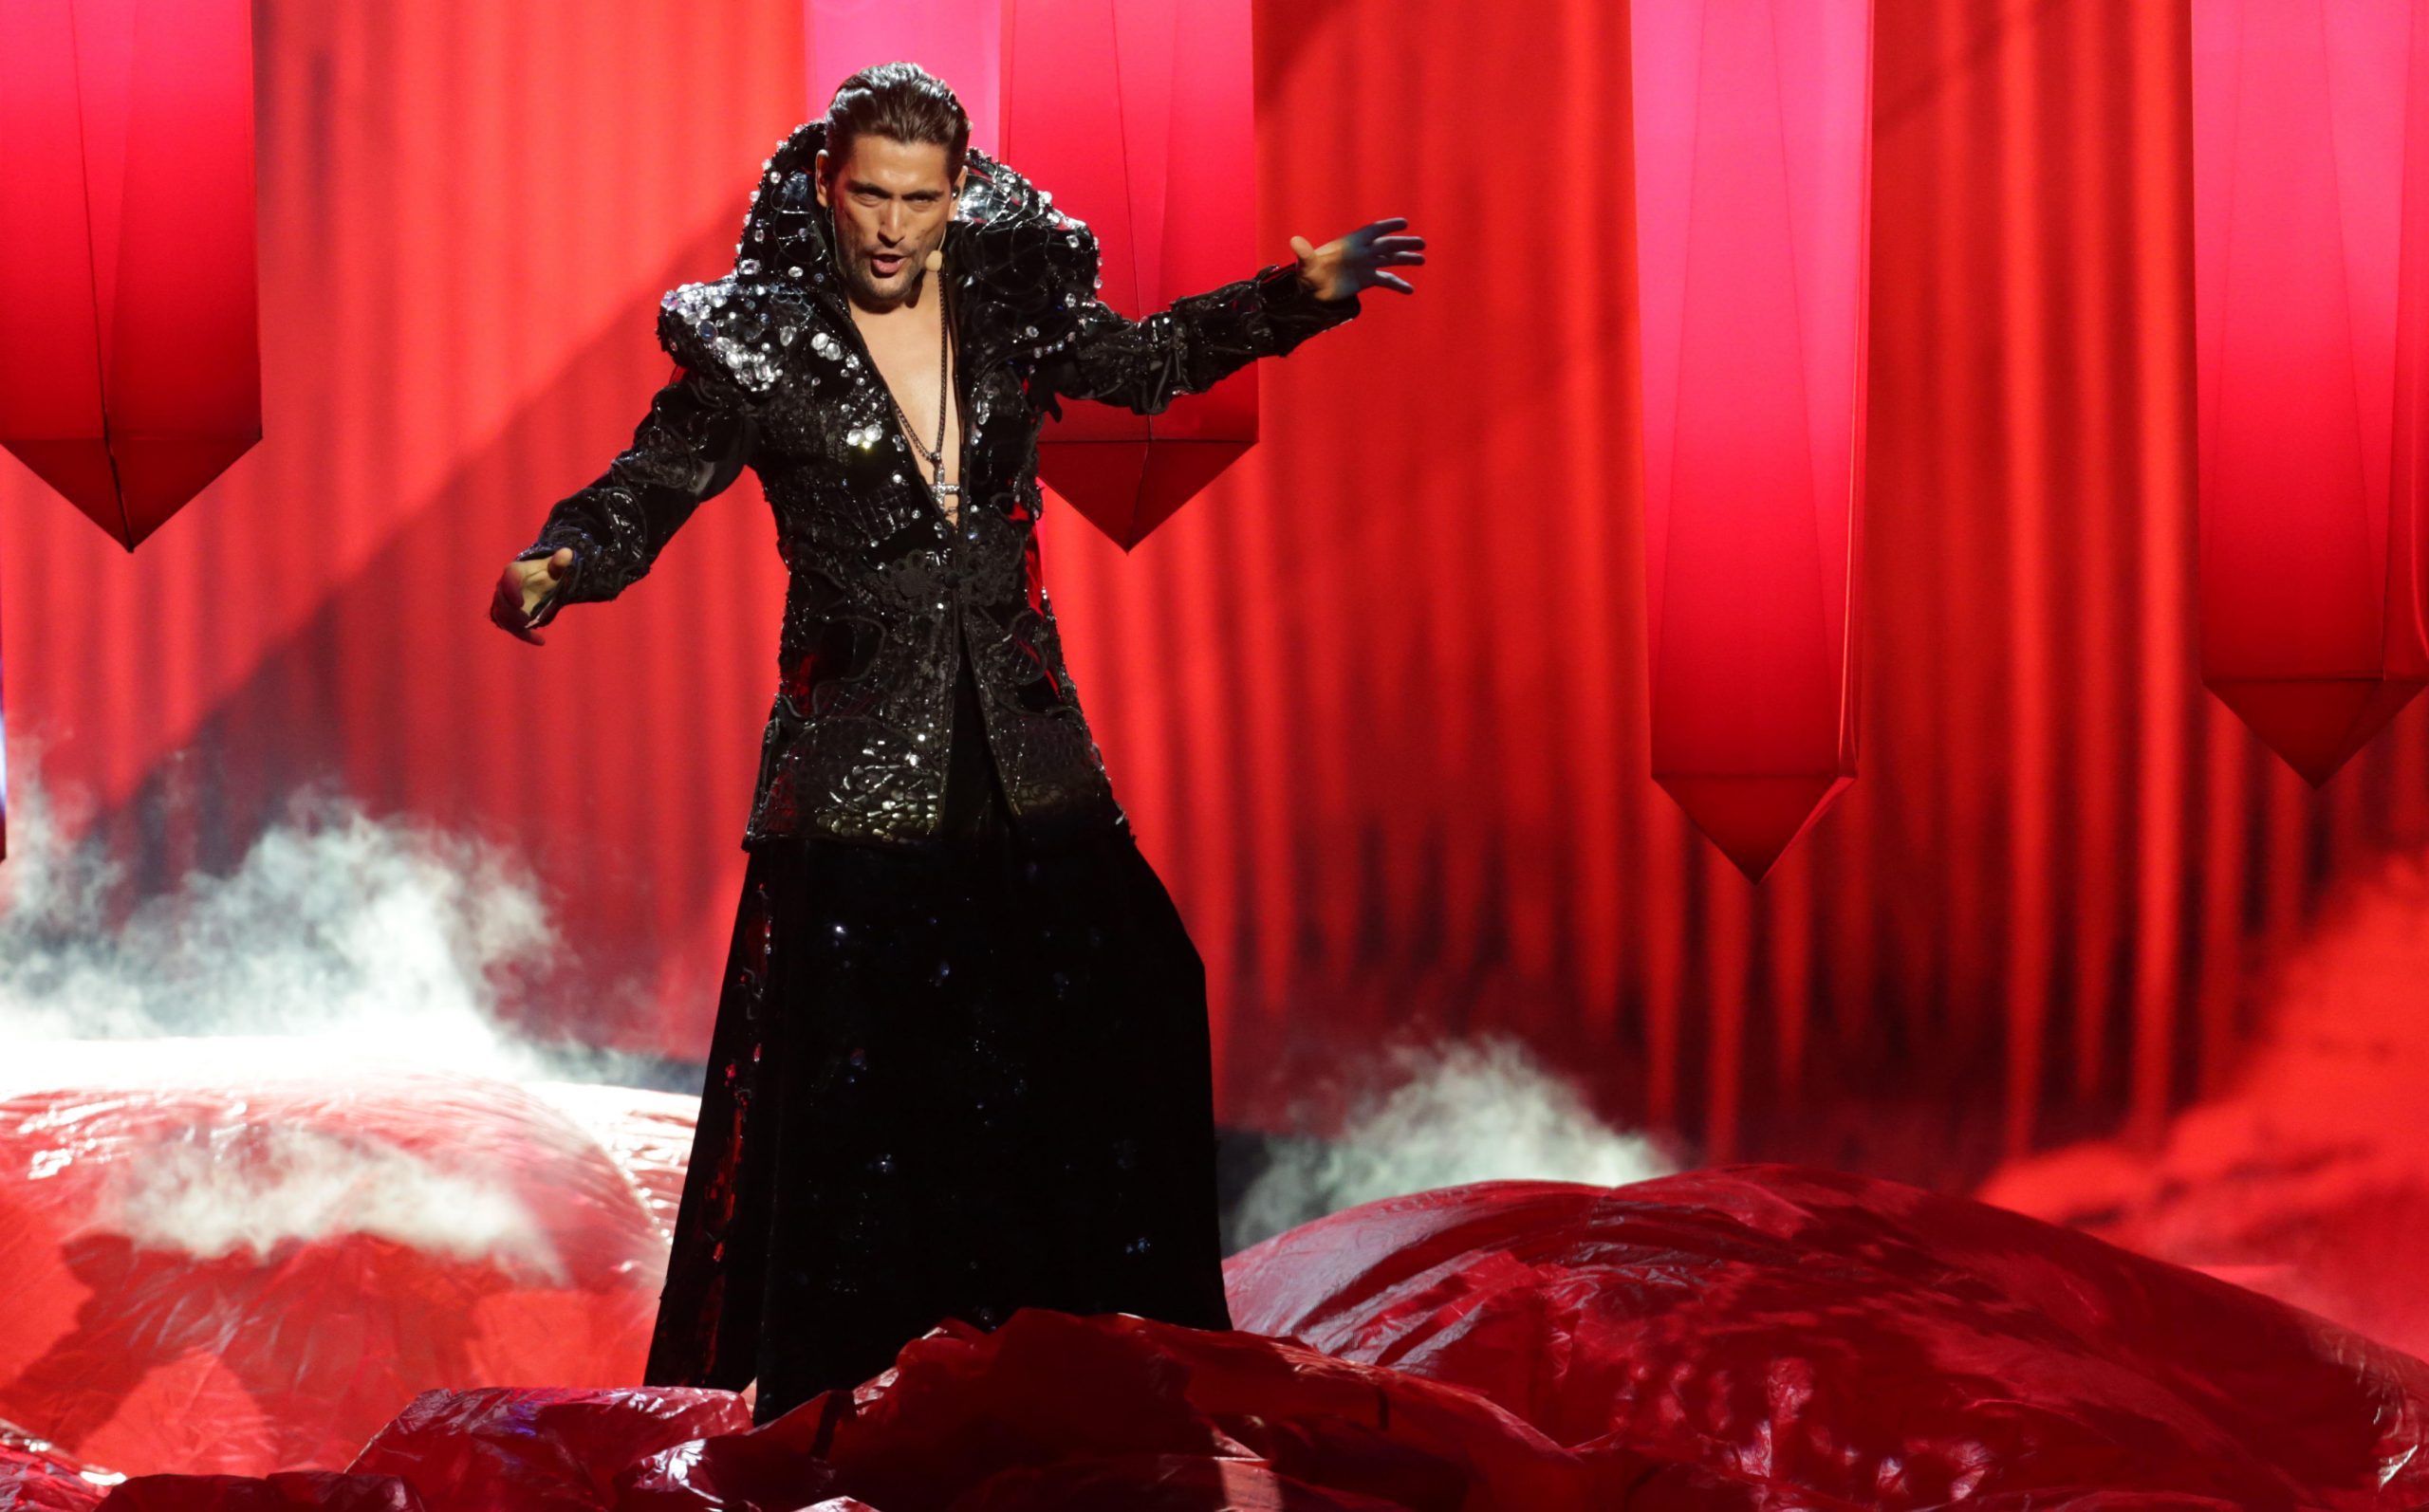 D7YF7F Singer Cezar representing Romania performing during the dress rehearsal of the 2nd Semi Final for the Eurovision Song Contest 2013 in Malmo, Sweden, 15 May 2013. The grand final of the 58th Eurovision Song Contest (ESC) takes place on 18 May 2013. Photo: Joerg Carstensen/dpa